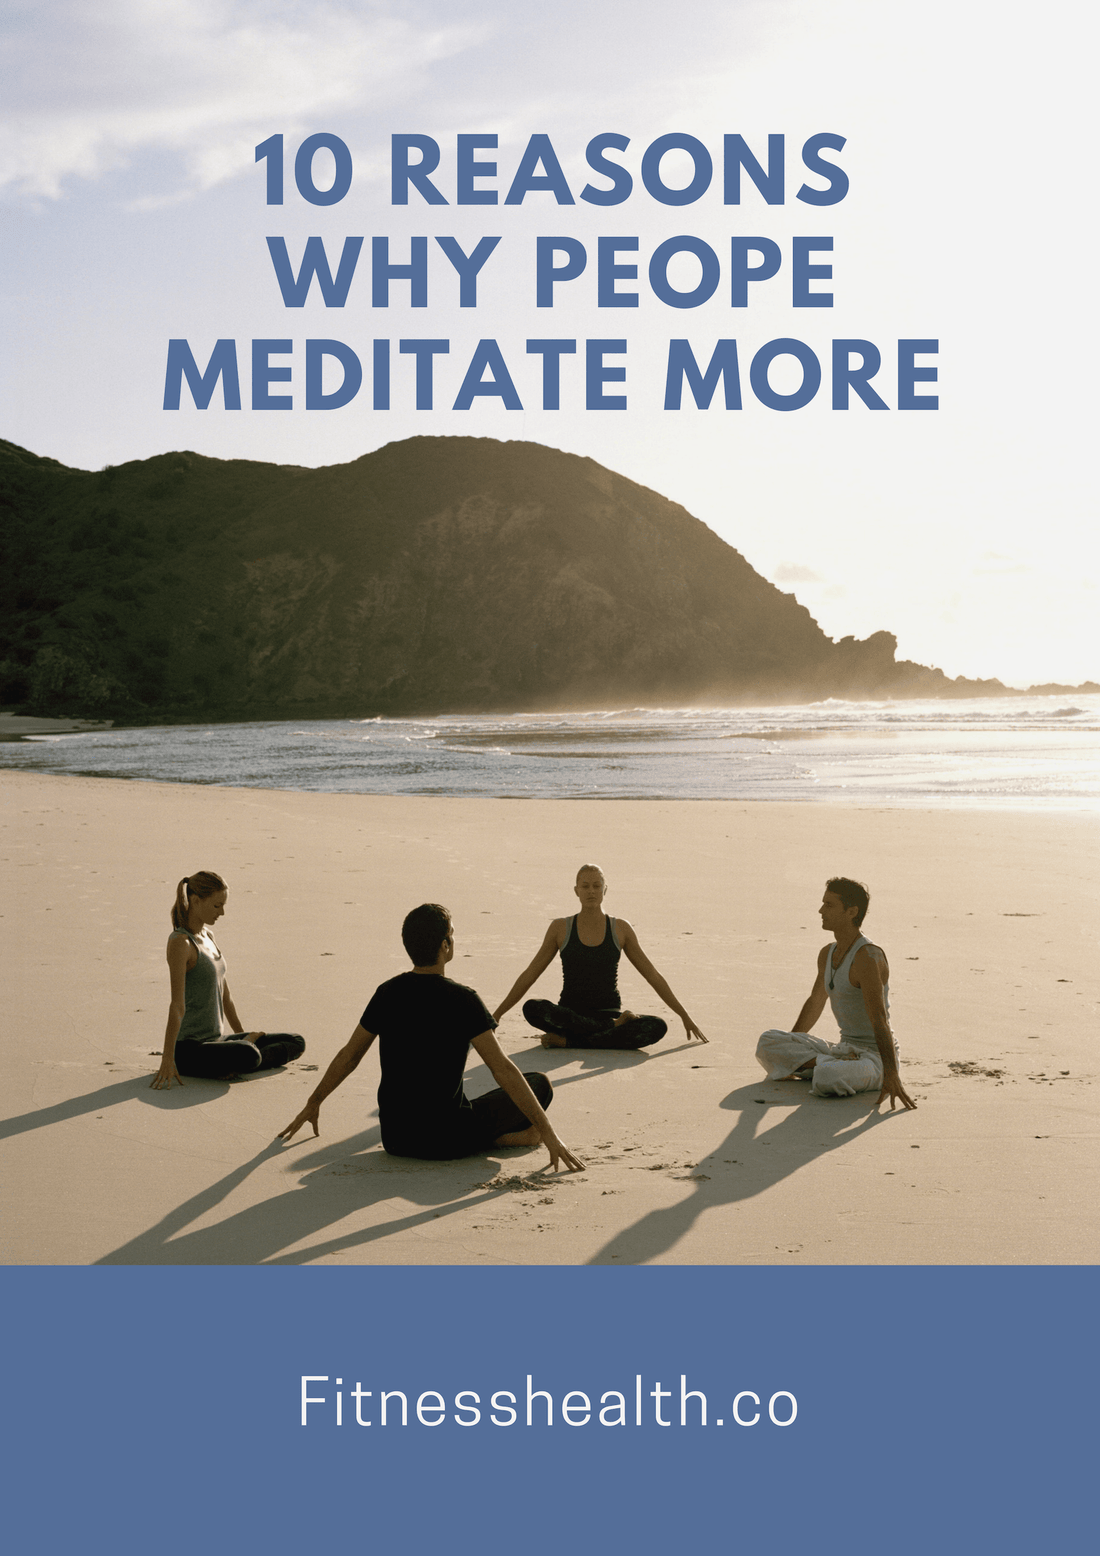 10 Reasons Why People Meditate More - Fitness Health 